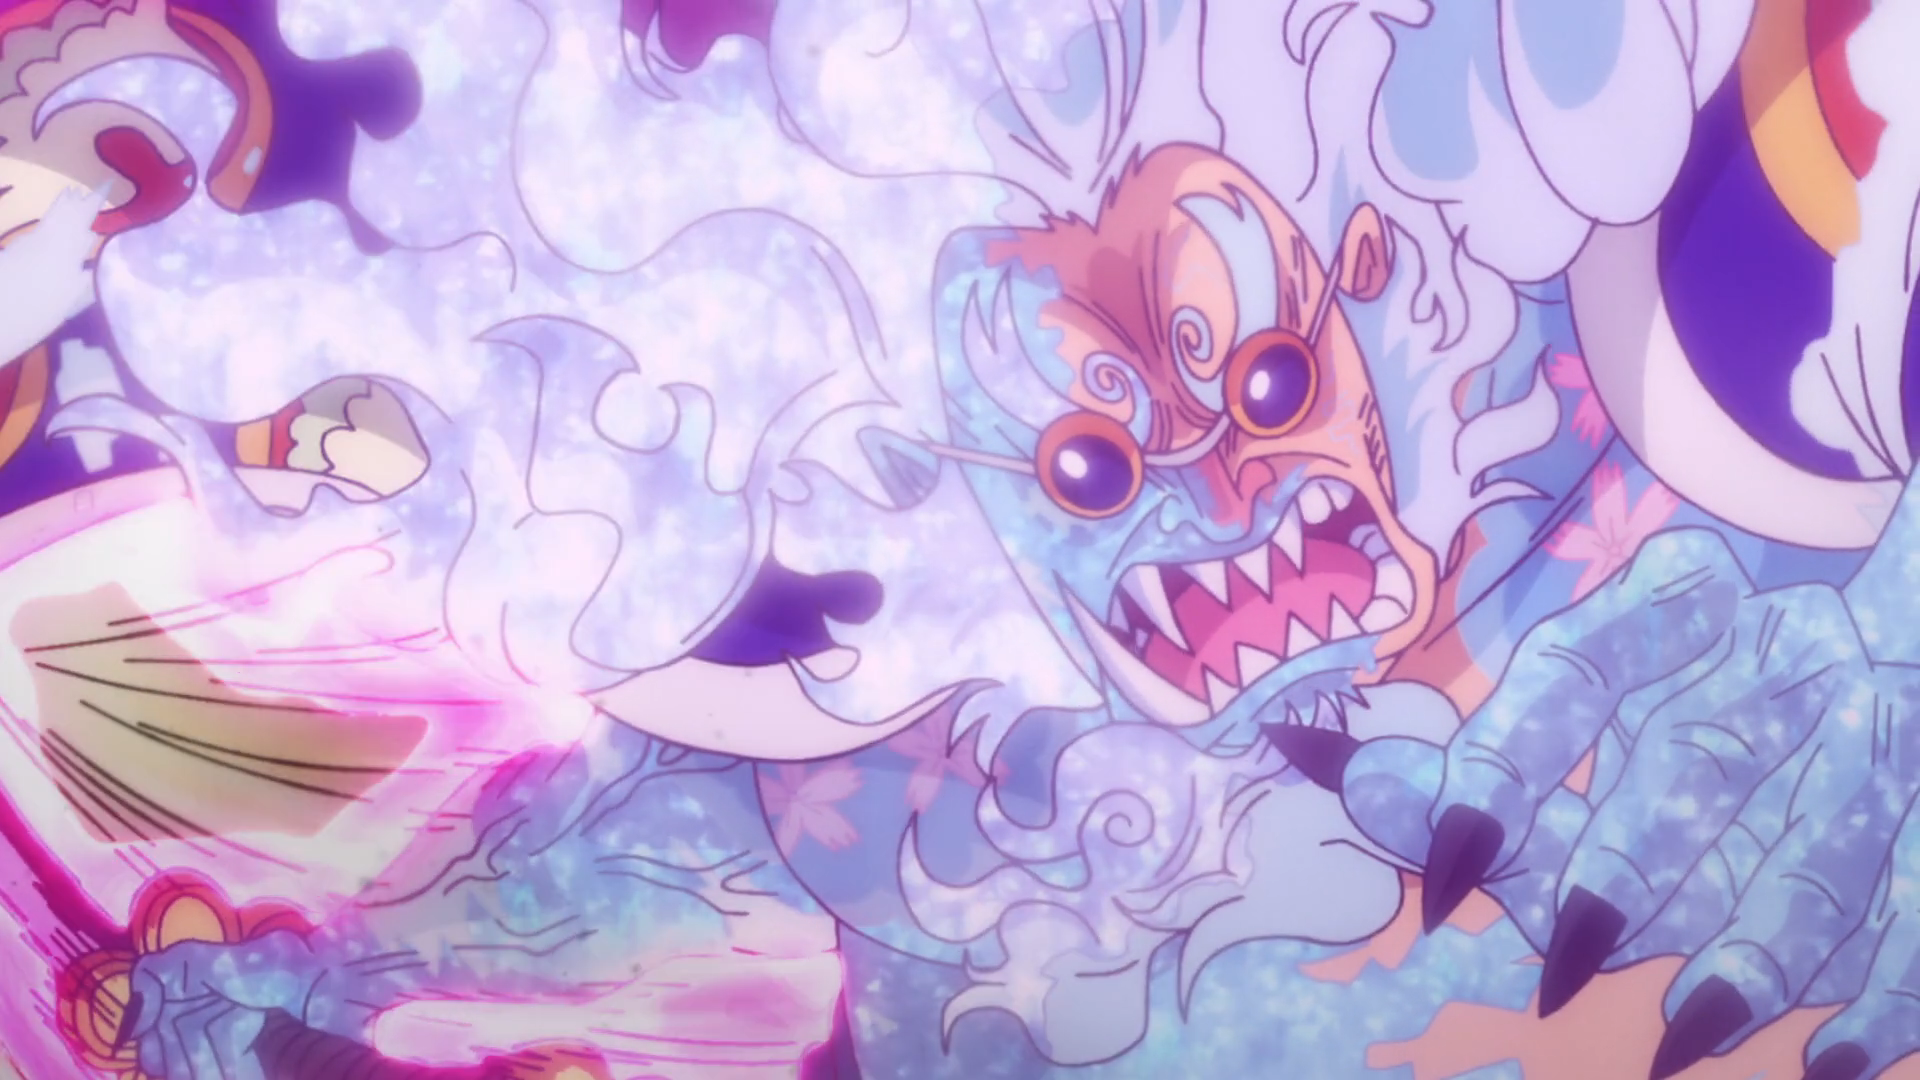 Character EXPANSION! One Piece Episode 1022 BREAKDOWN 